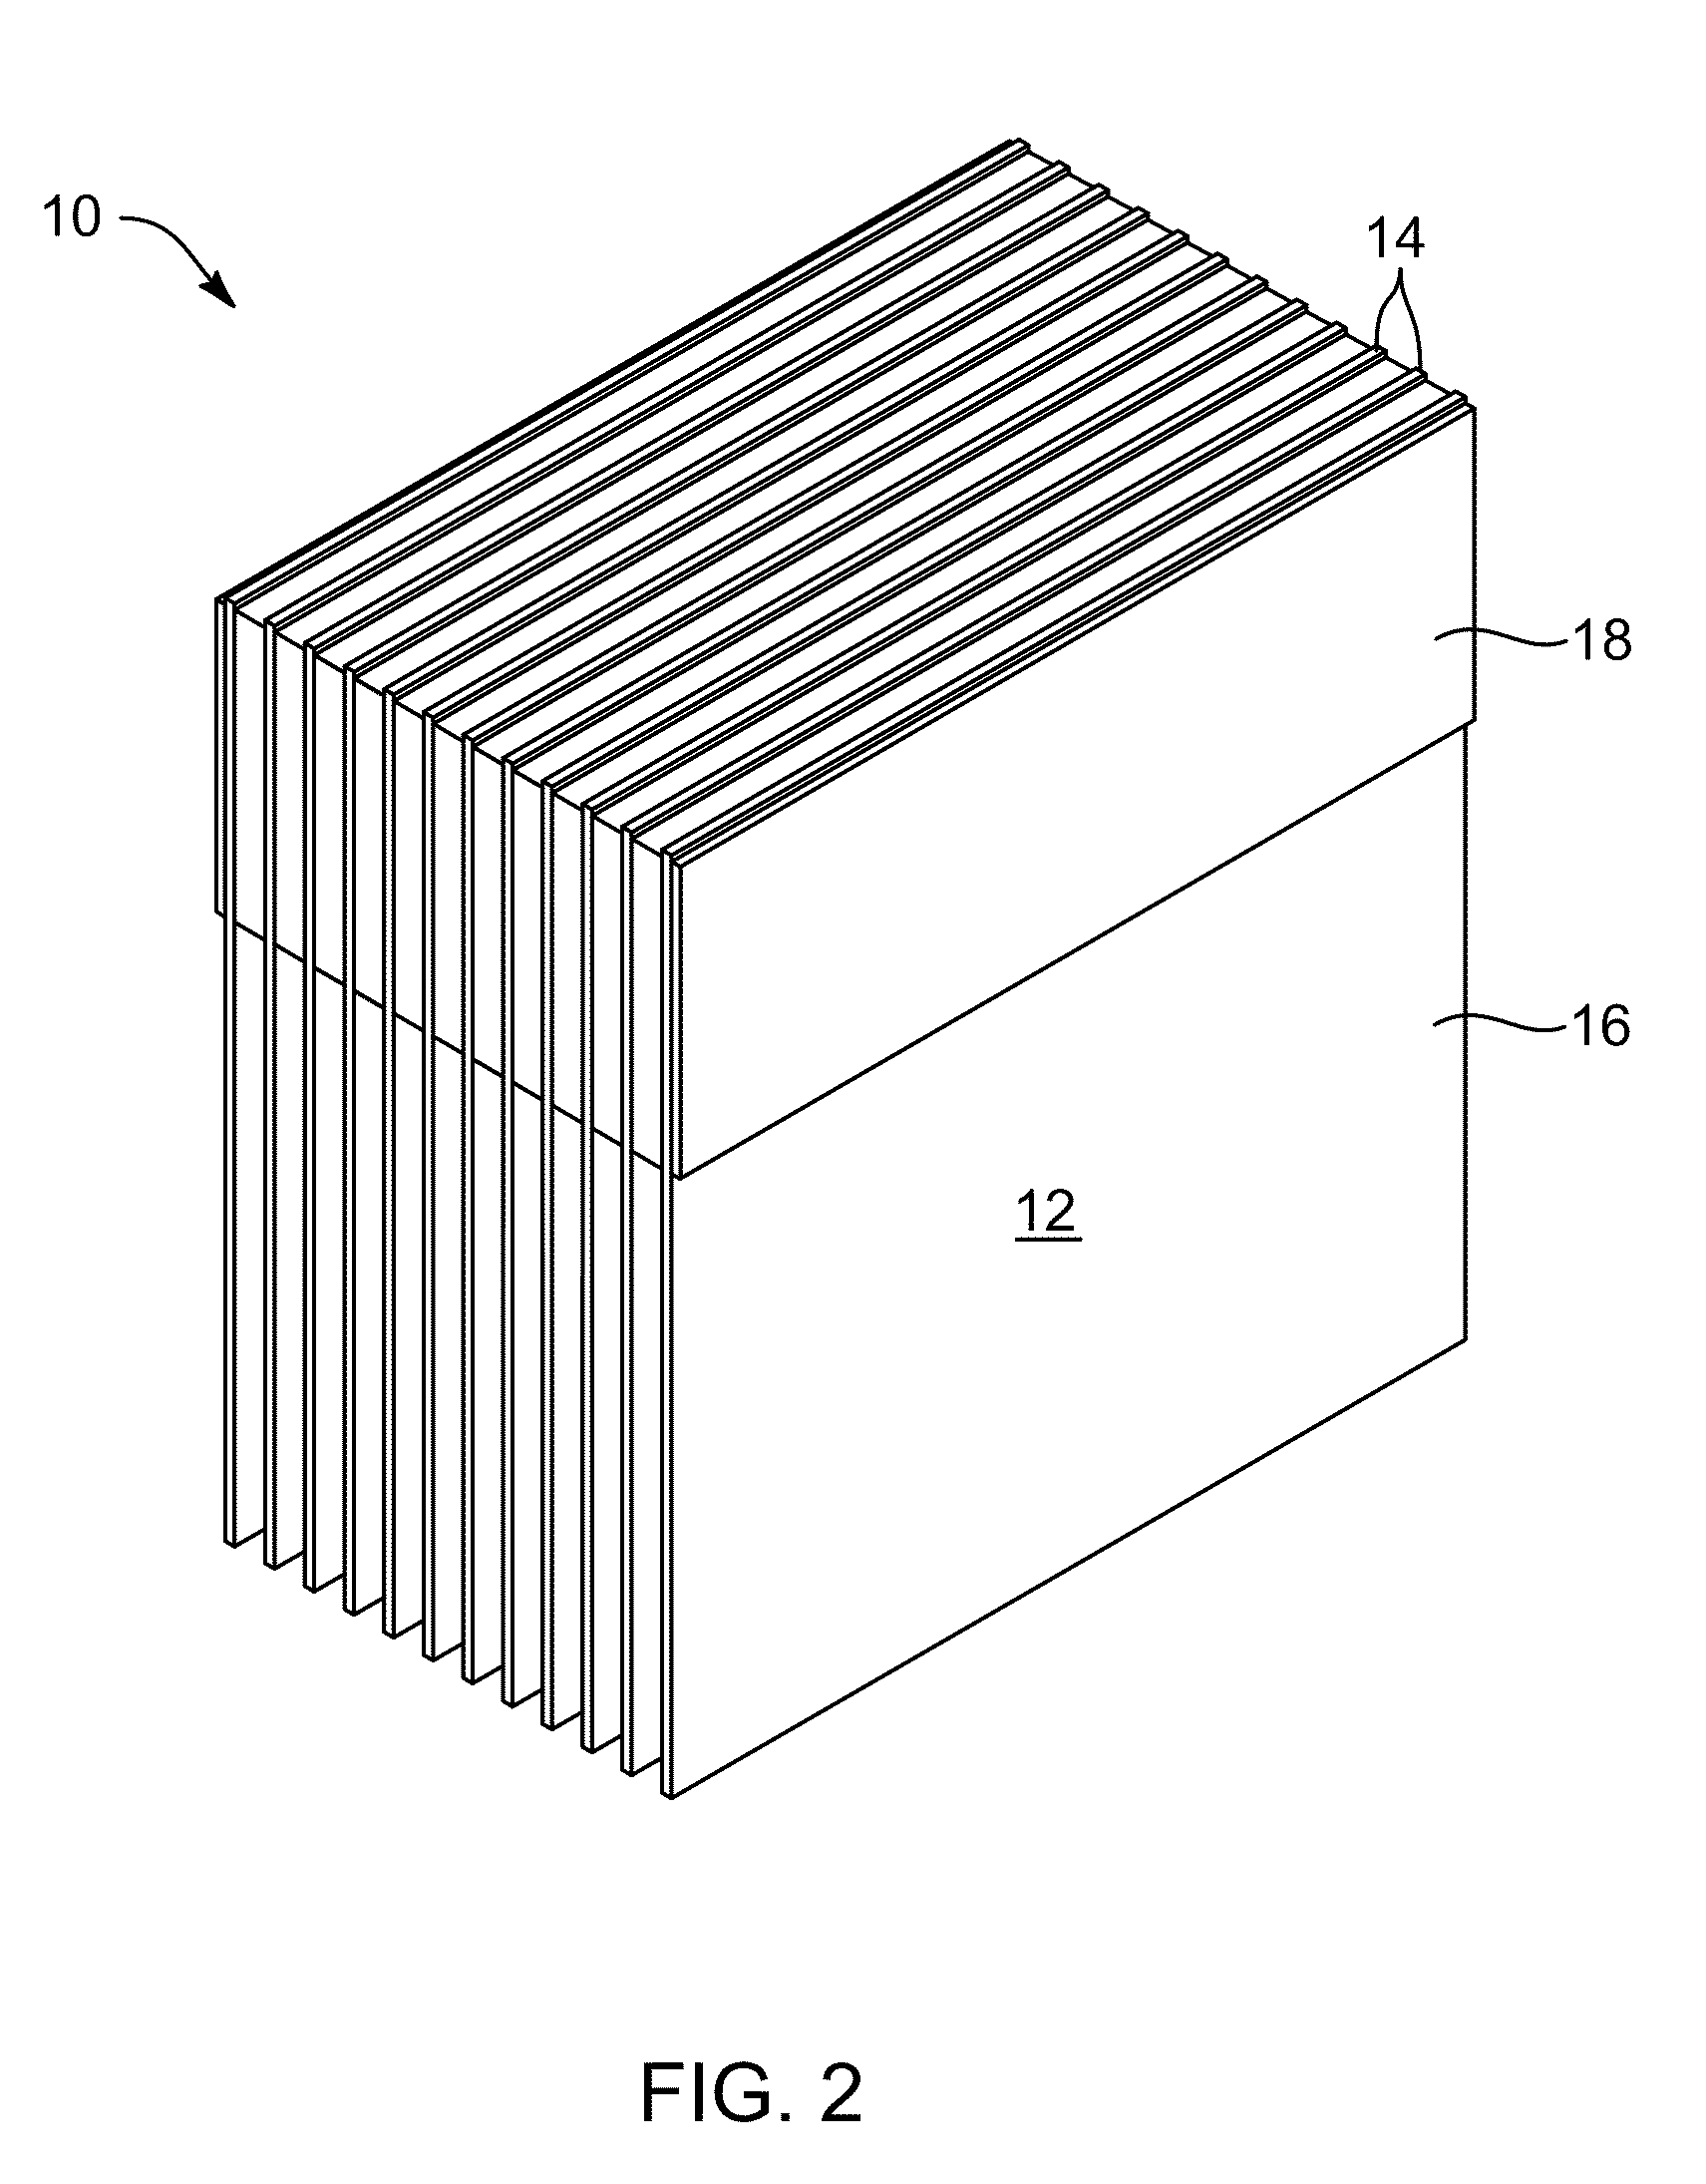 Two-phase-flow, panel-cooled, battery apparatus and method